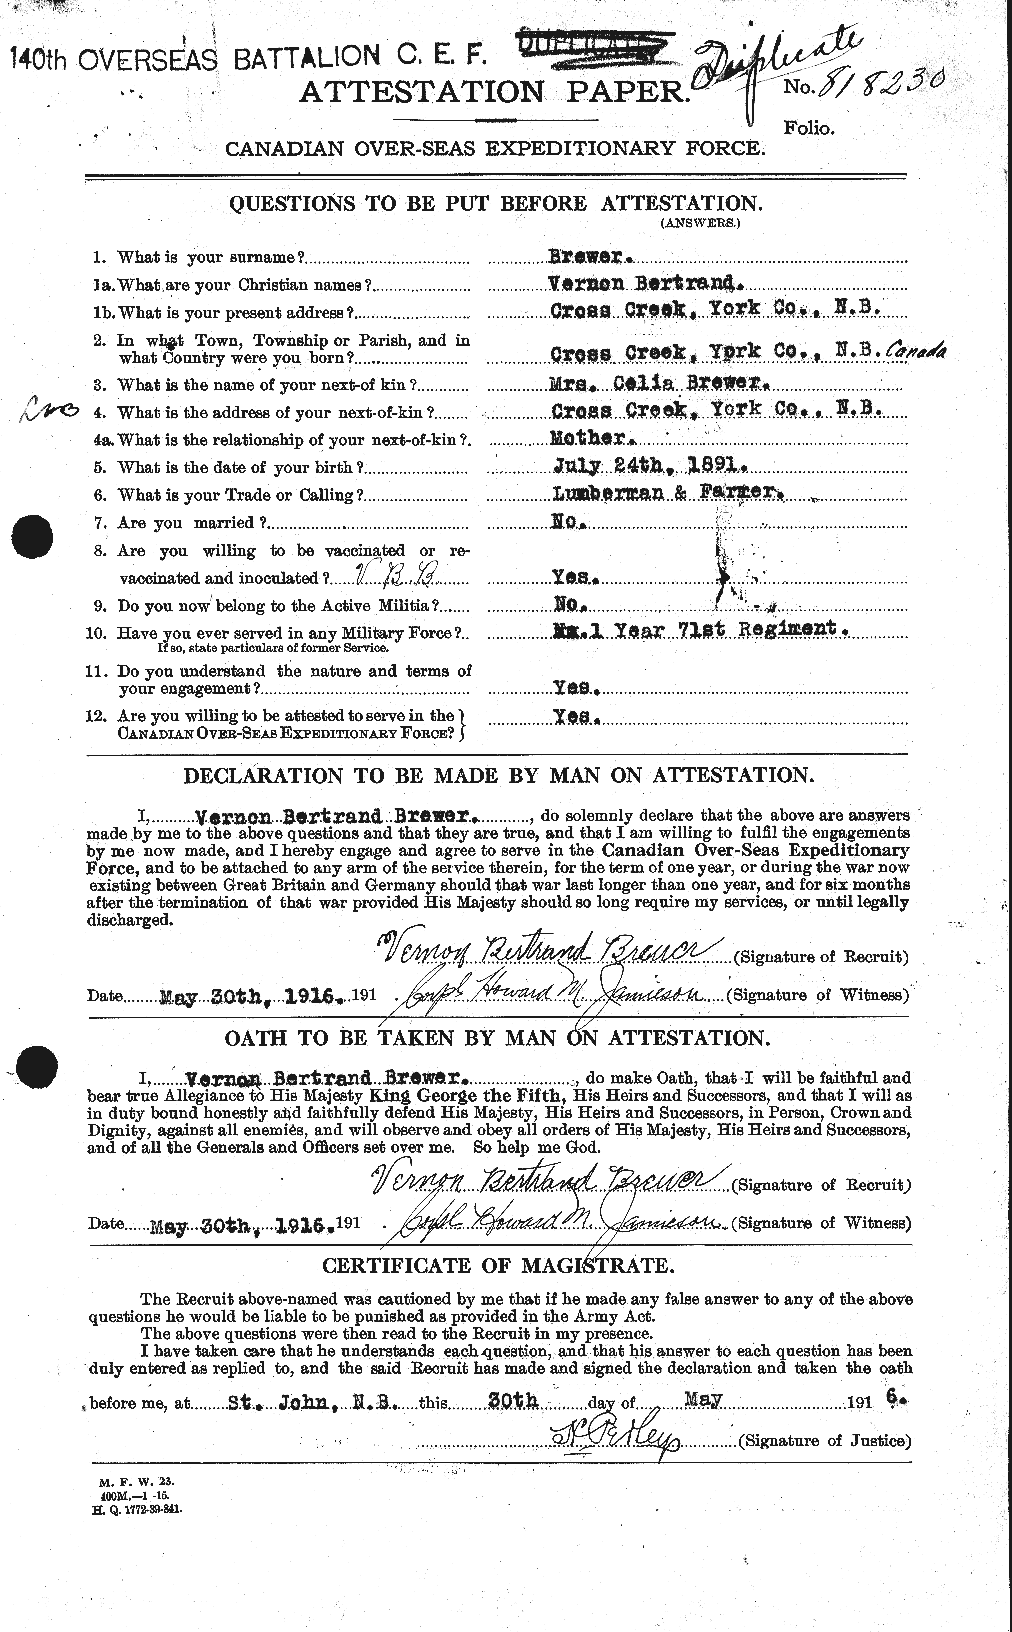 Personnel Records of the First World War - CEF 260817a